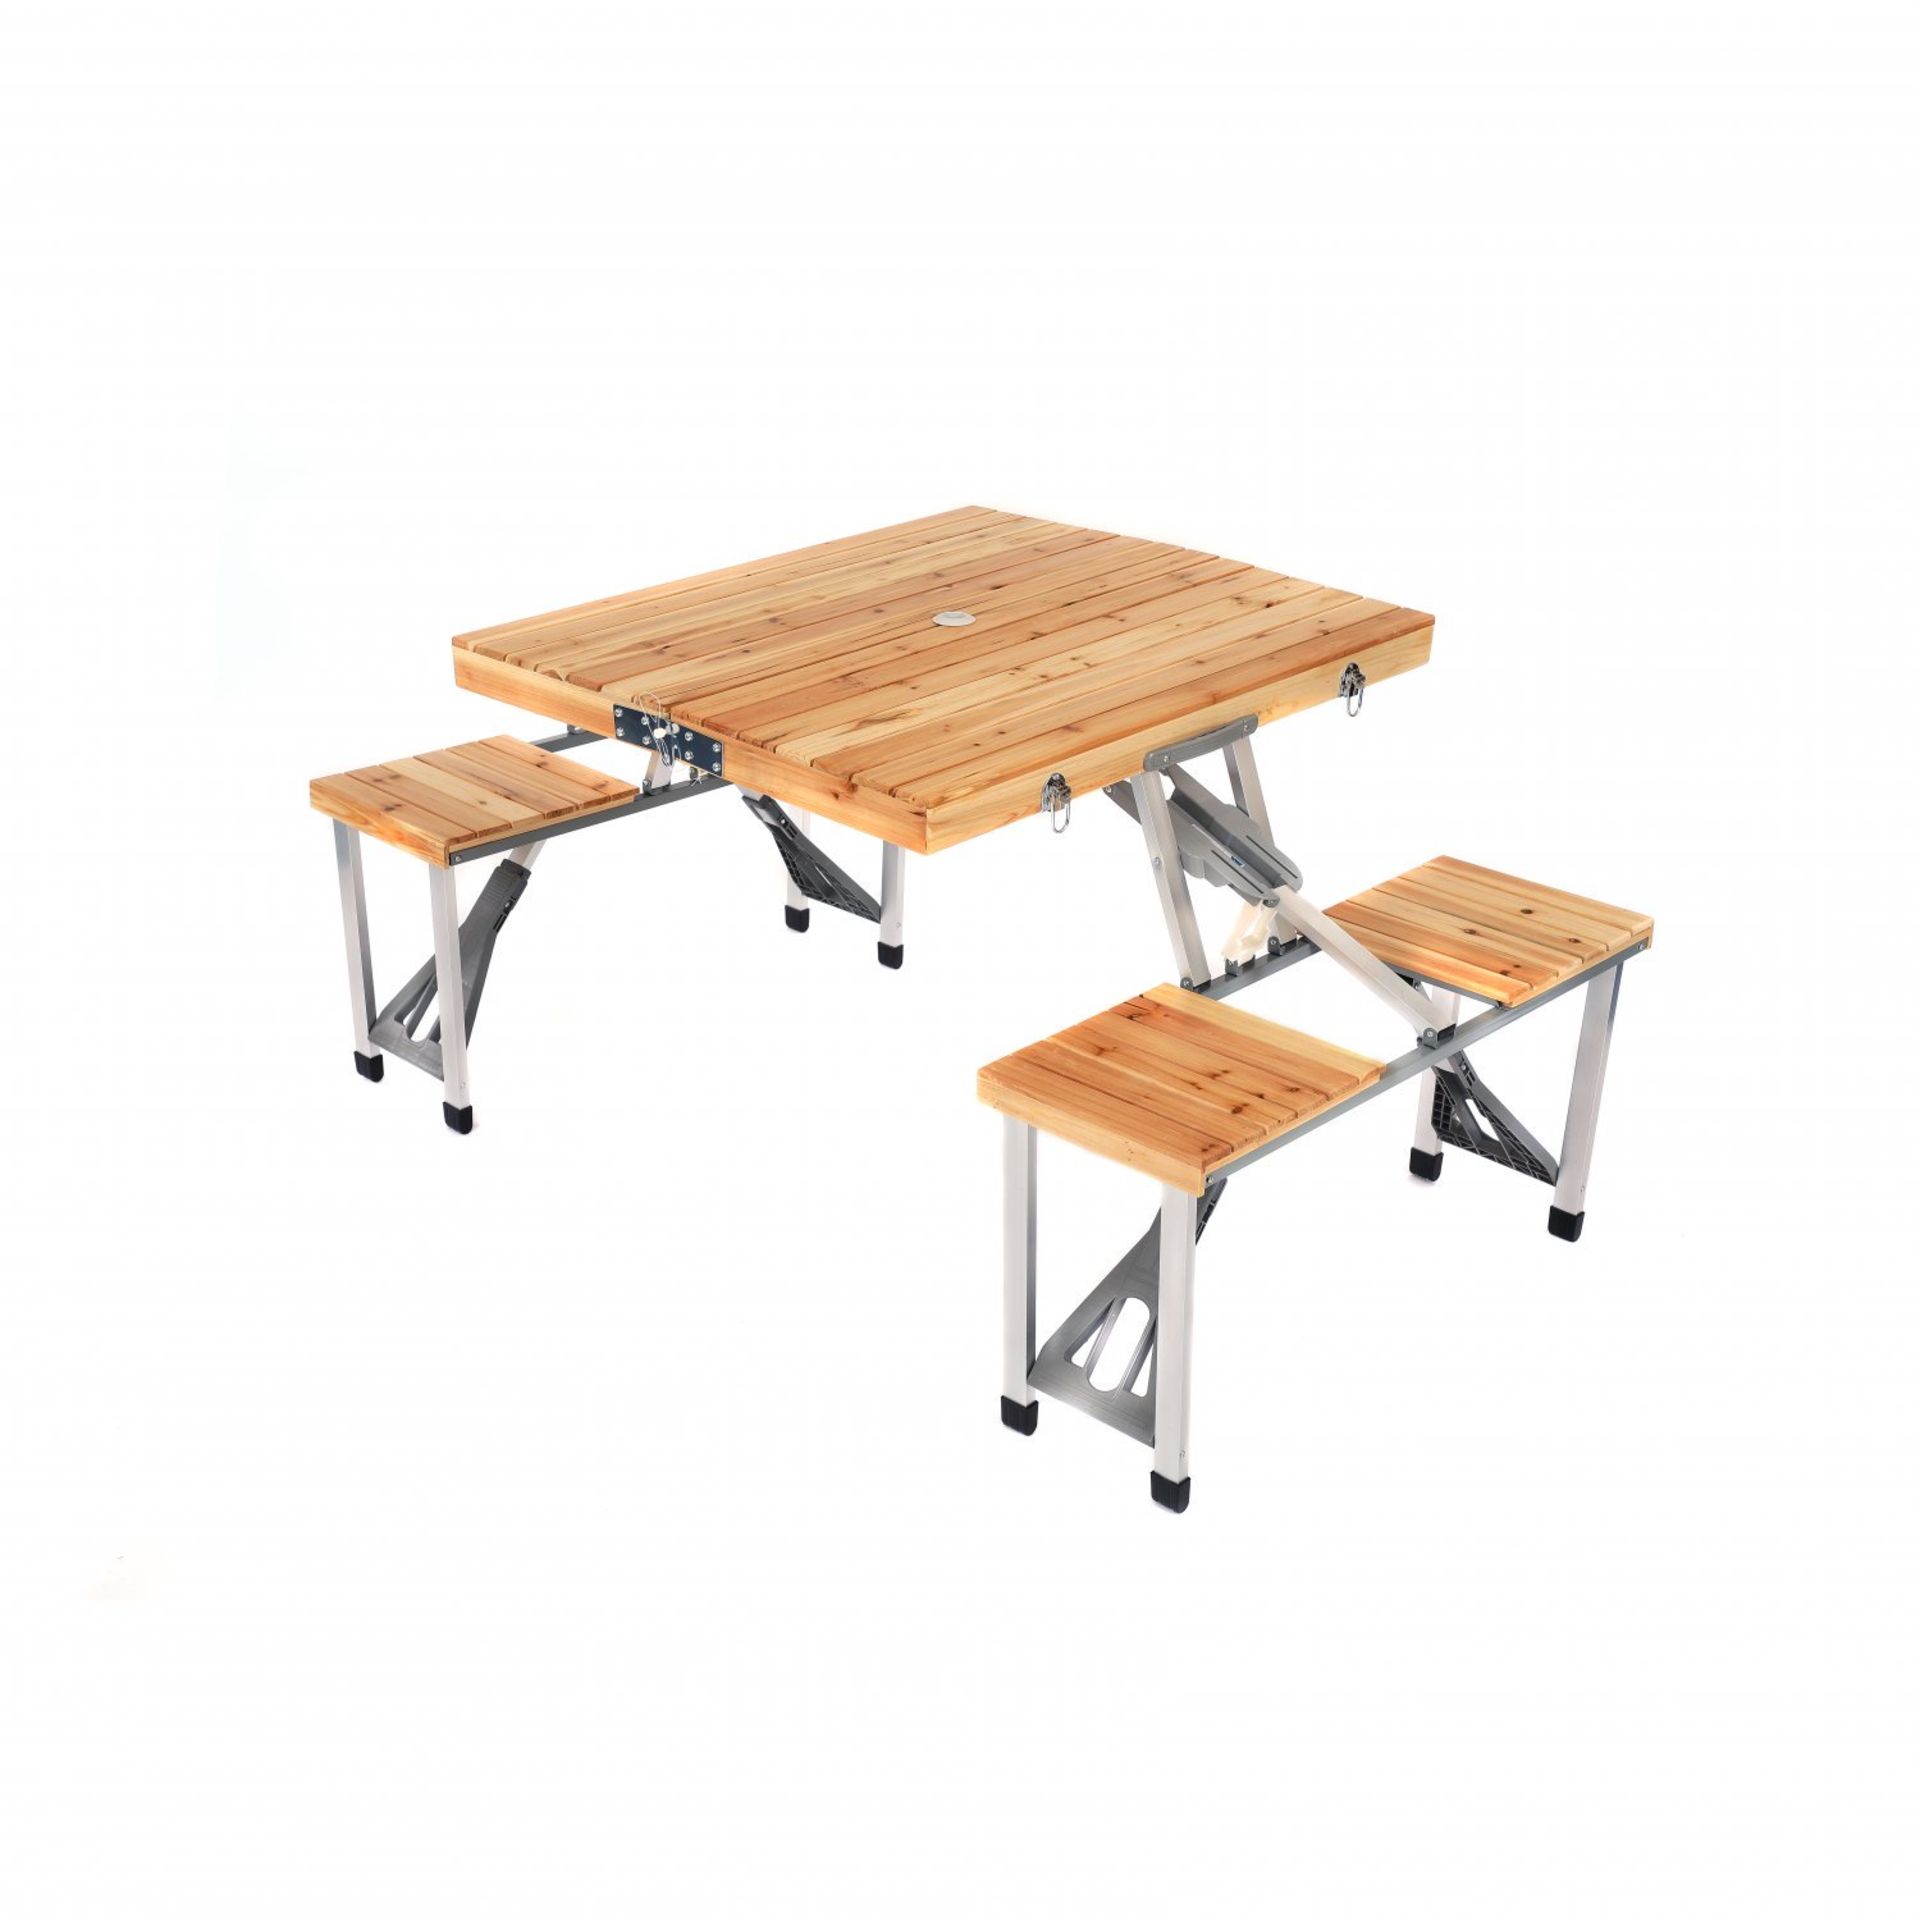 (D17) Wooden Folding Outdoor Picnic Table and Bench Set 4 Seats Open Dimensions: 134 x 82 x 66...